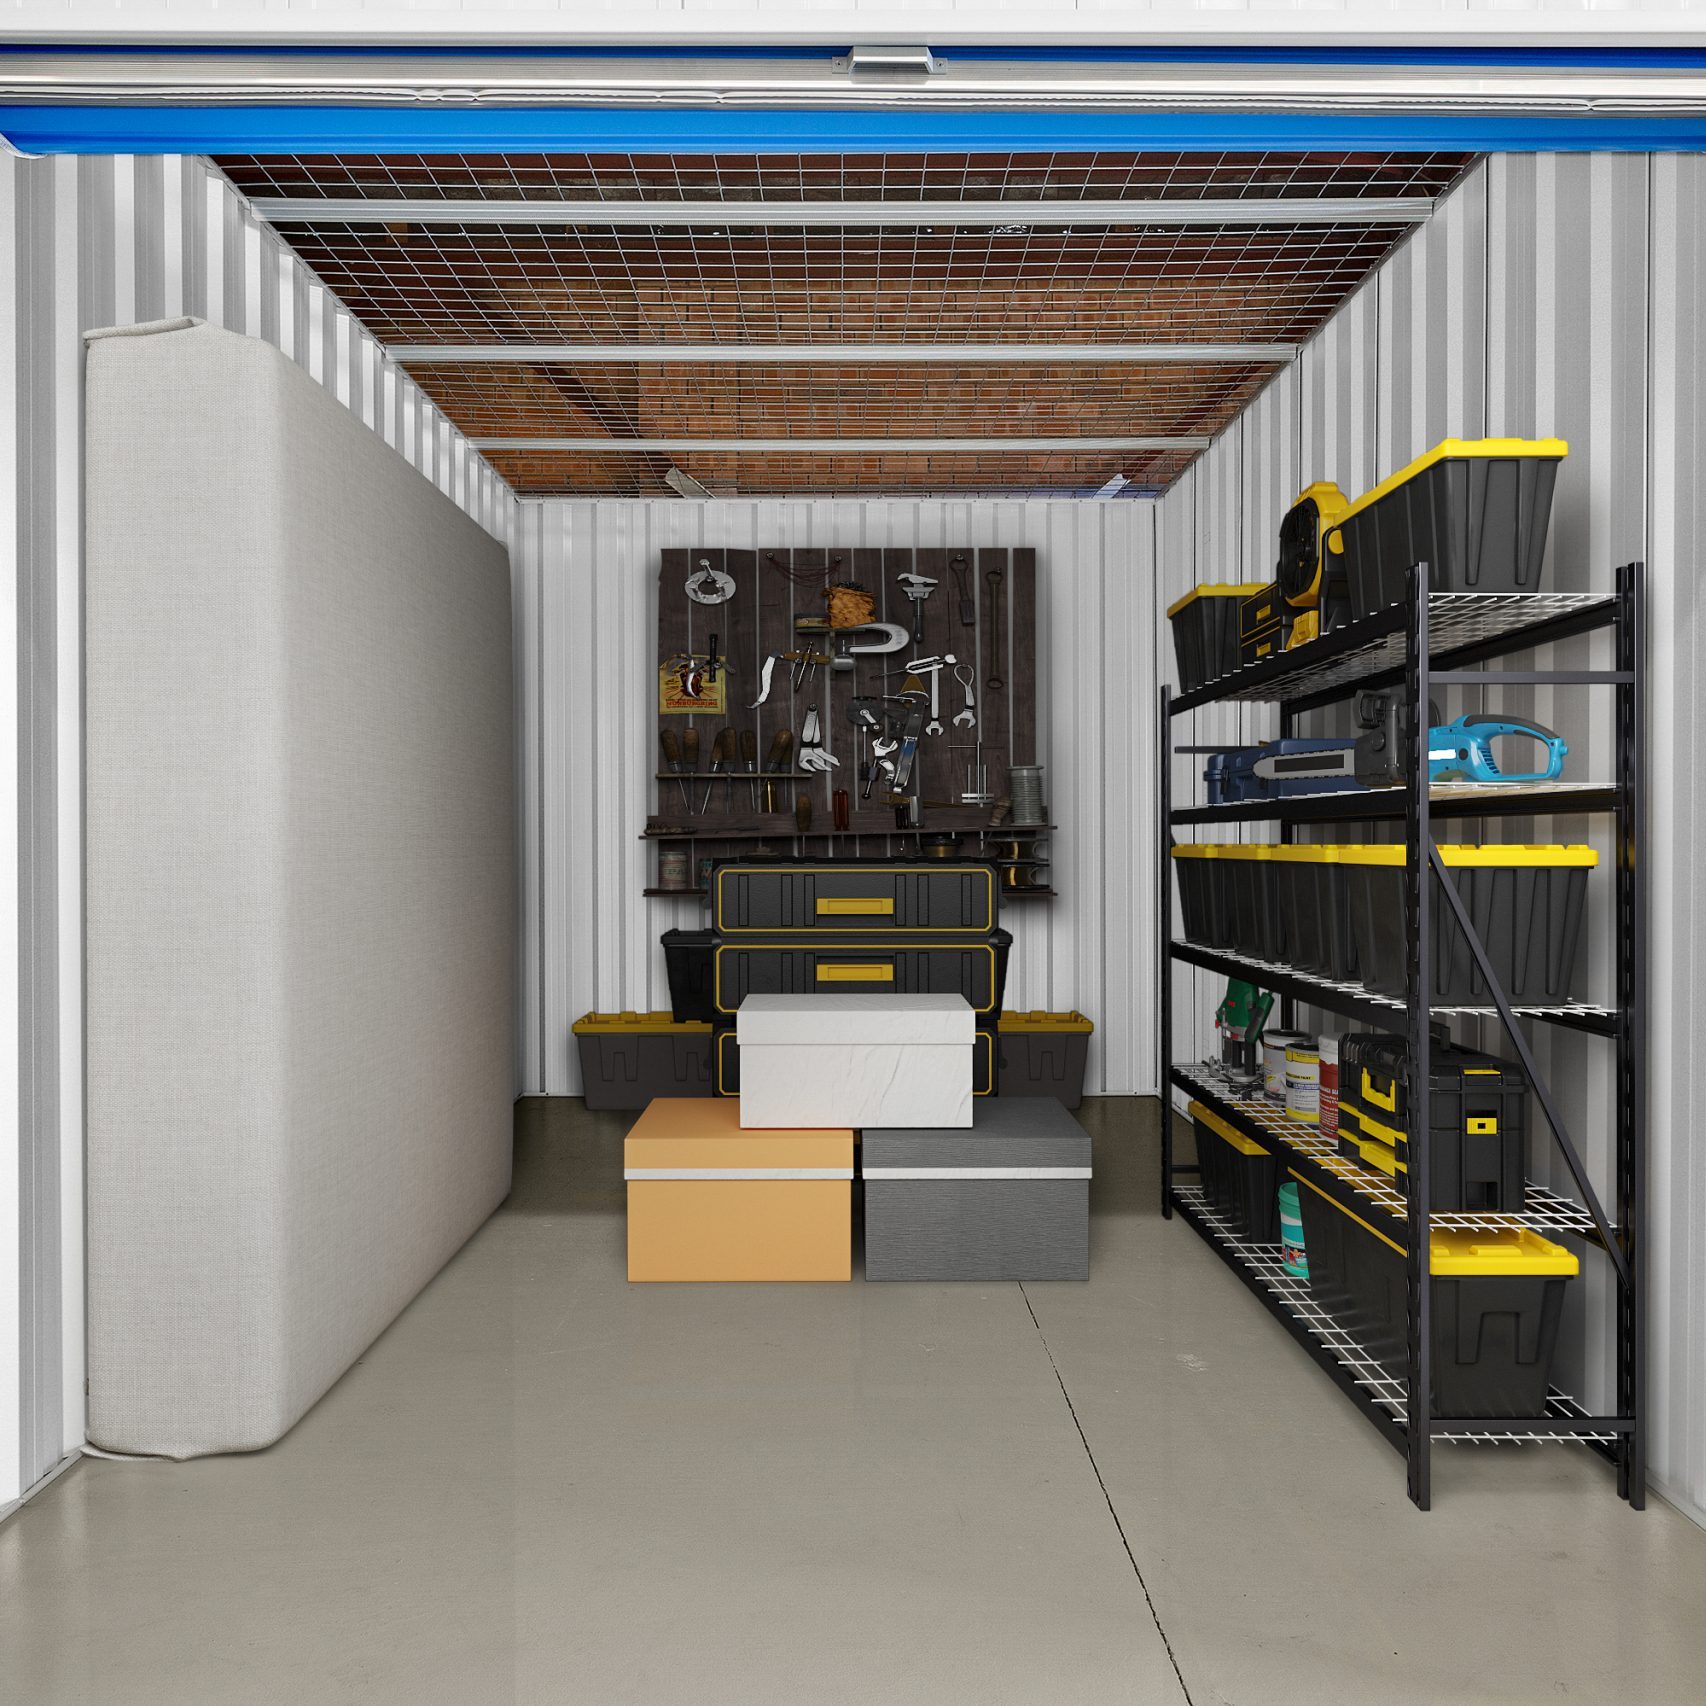 http://The%20inside%20of%20a%20storage%20unit%20with%20shelves%20and%20tools.